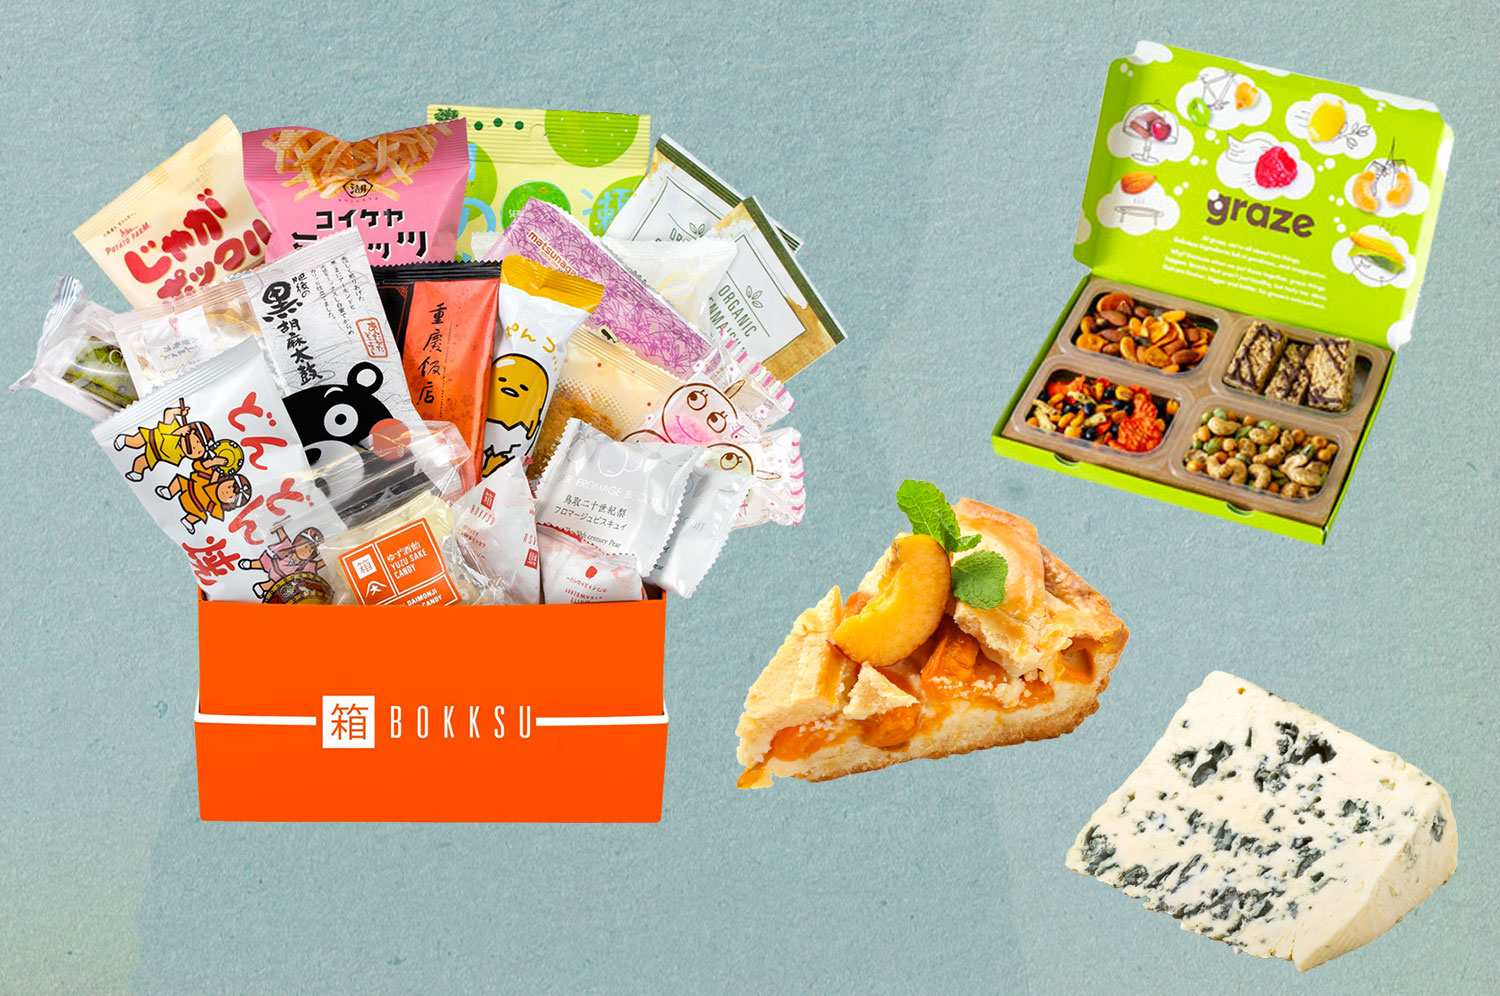 An open Bokksu box, Graze box, and slice of pie and slice of cheese.